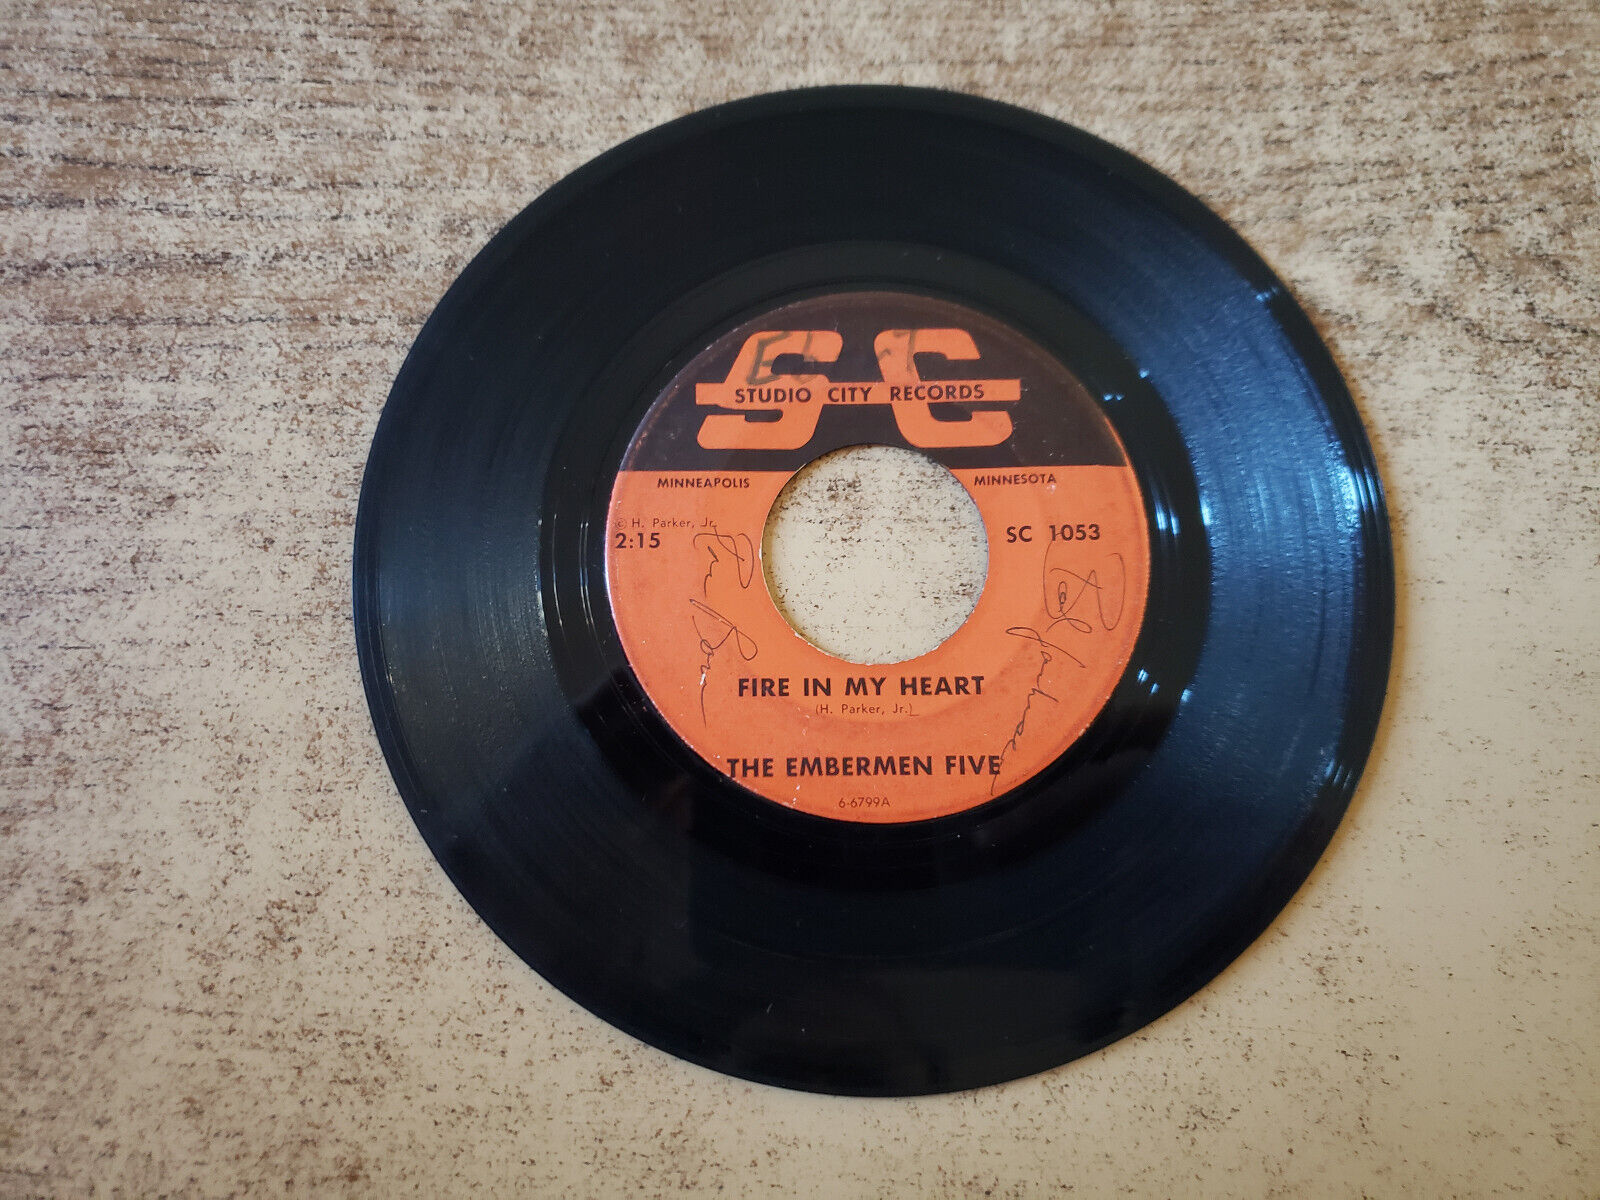 SIGNED AUTHENTICATED EMBERMEN FIVE 1960s VG Without your love/fire in my heart45